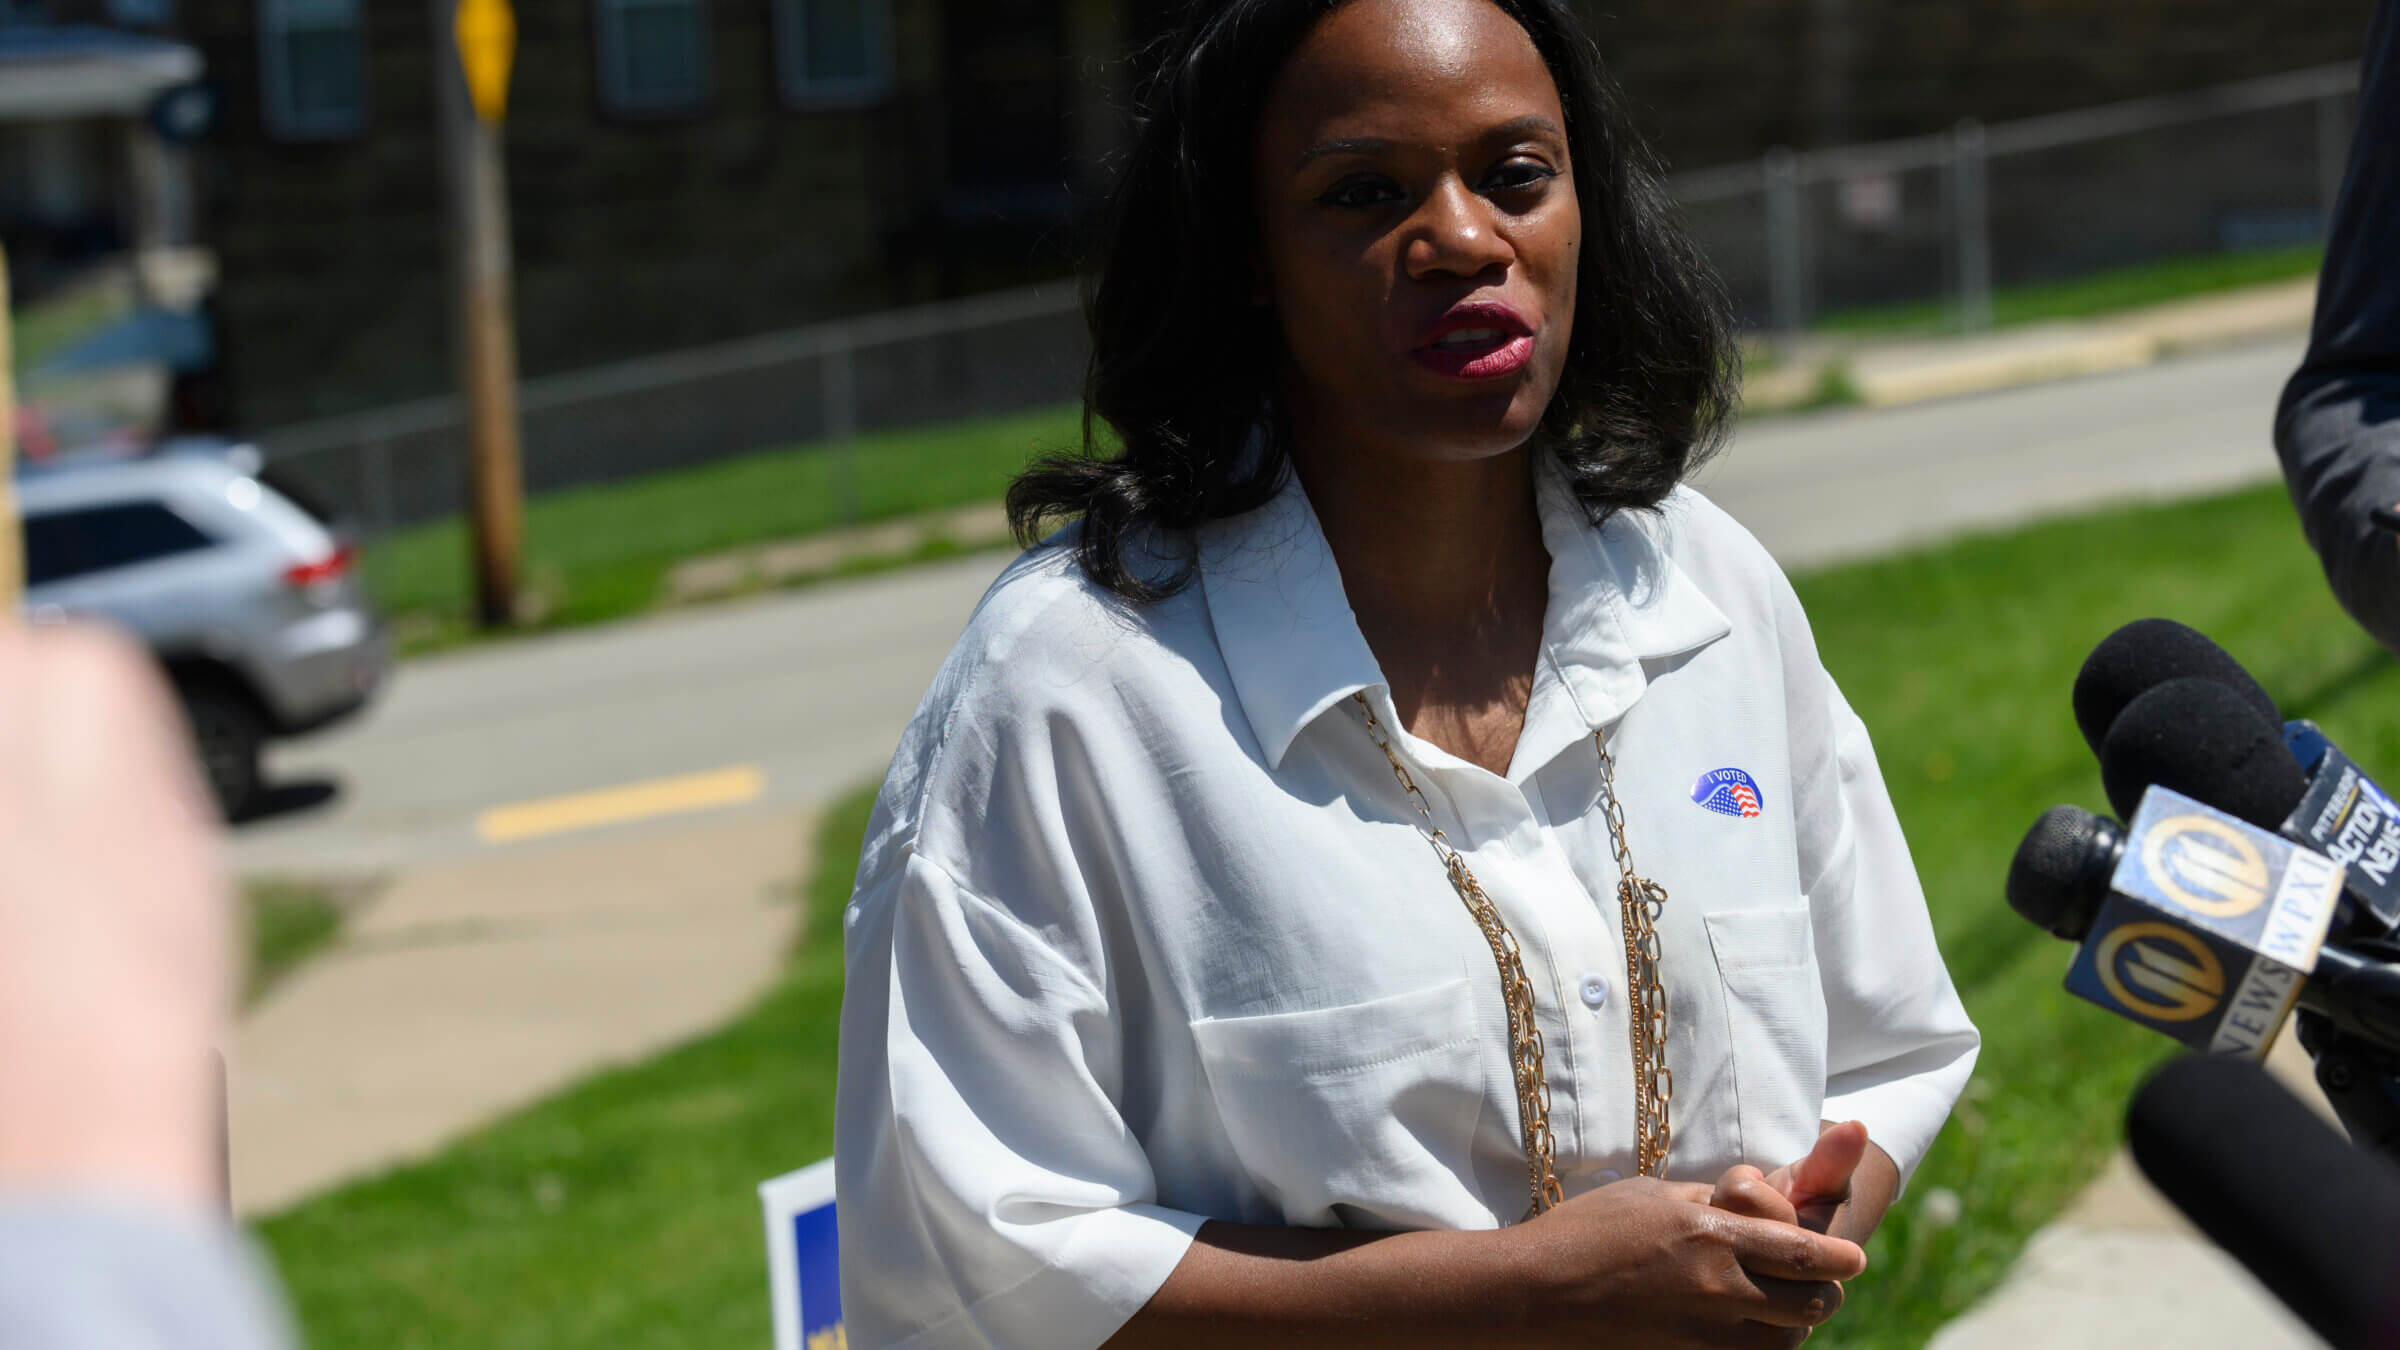 State Rep. Summer Lee talks to the press outside her polling station at the Paulson Recreation Center after voting on May 17, 2022